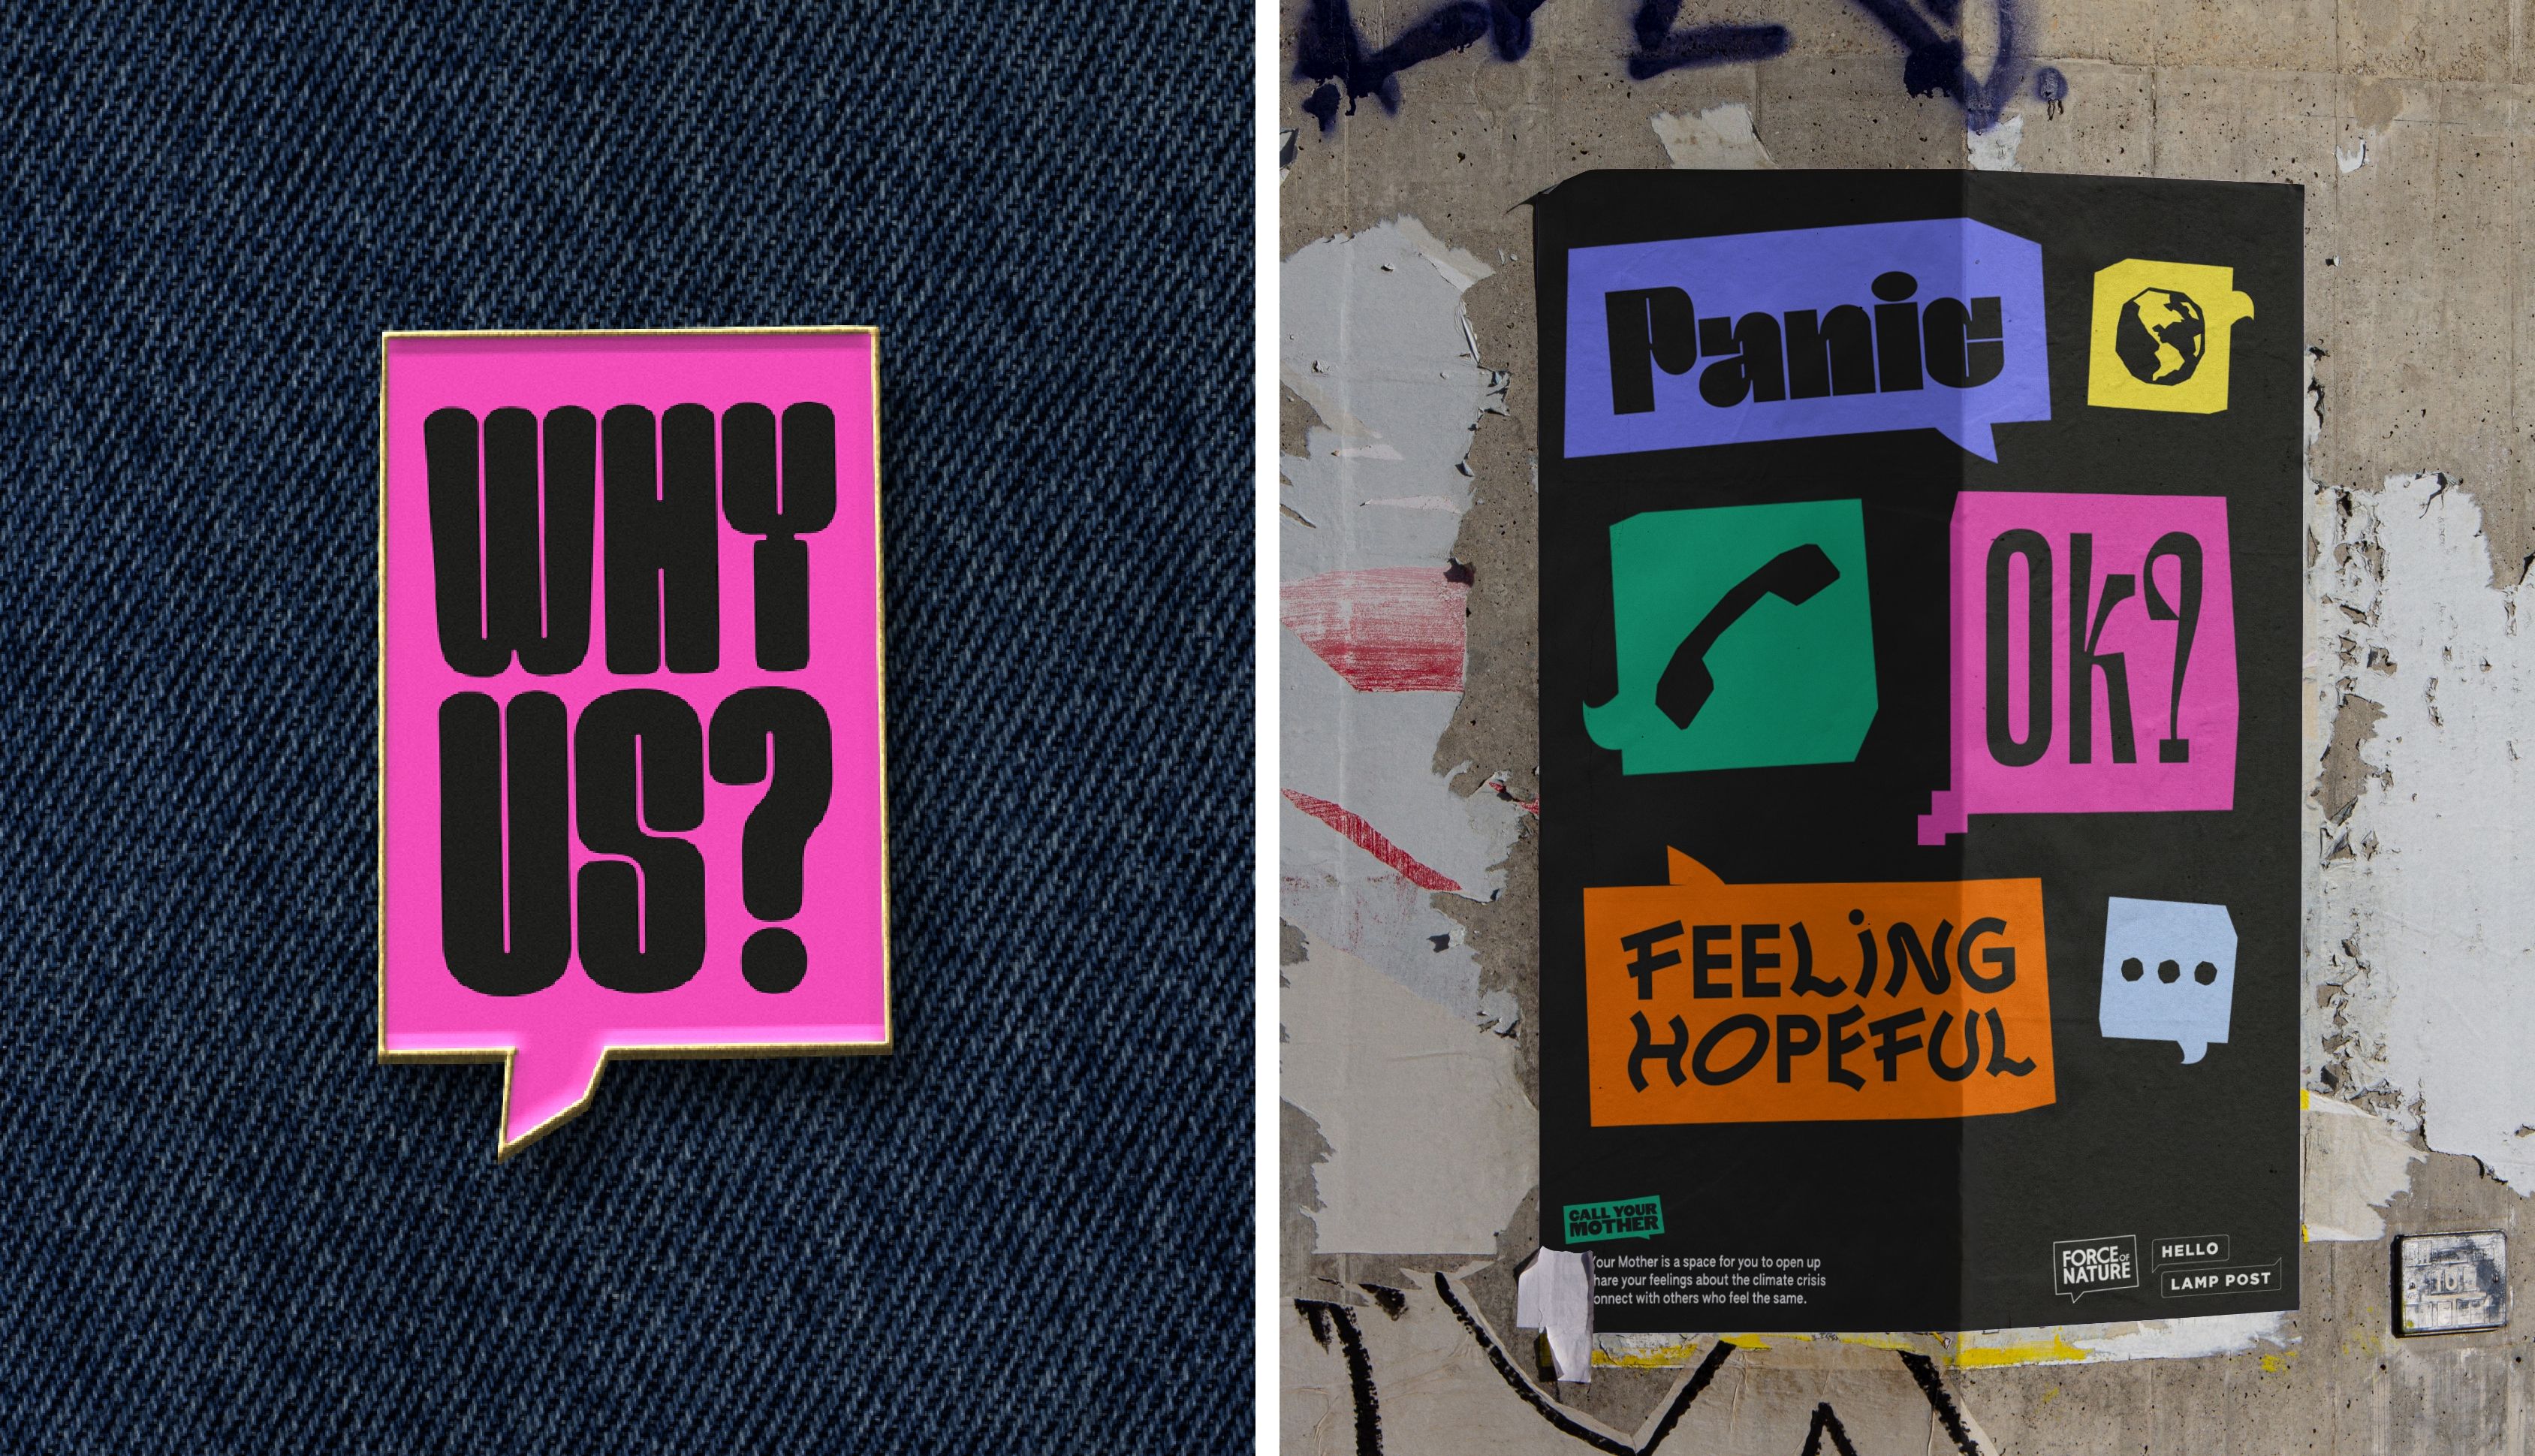 Two images, one showing a branded pin and one showing a poster